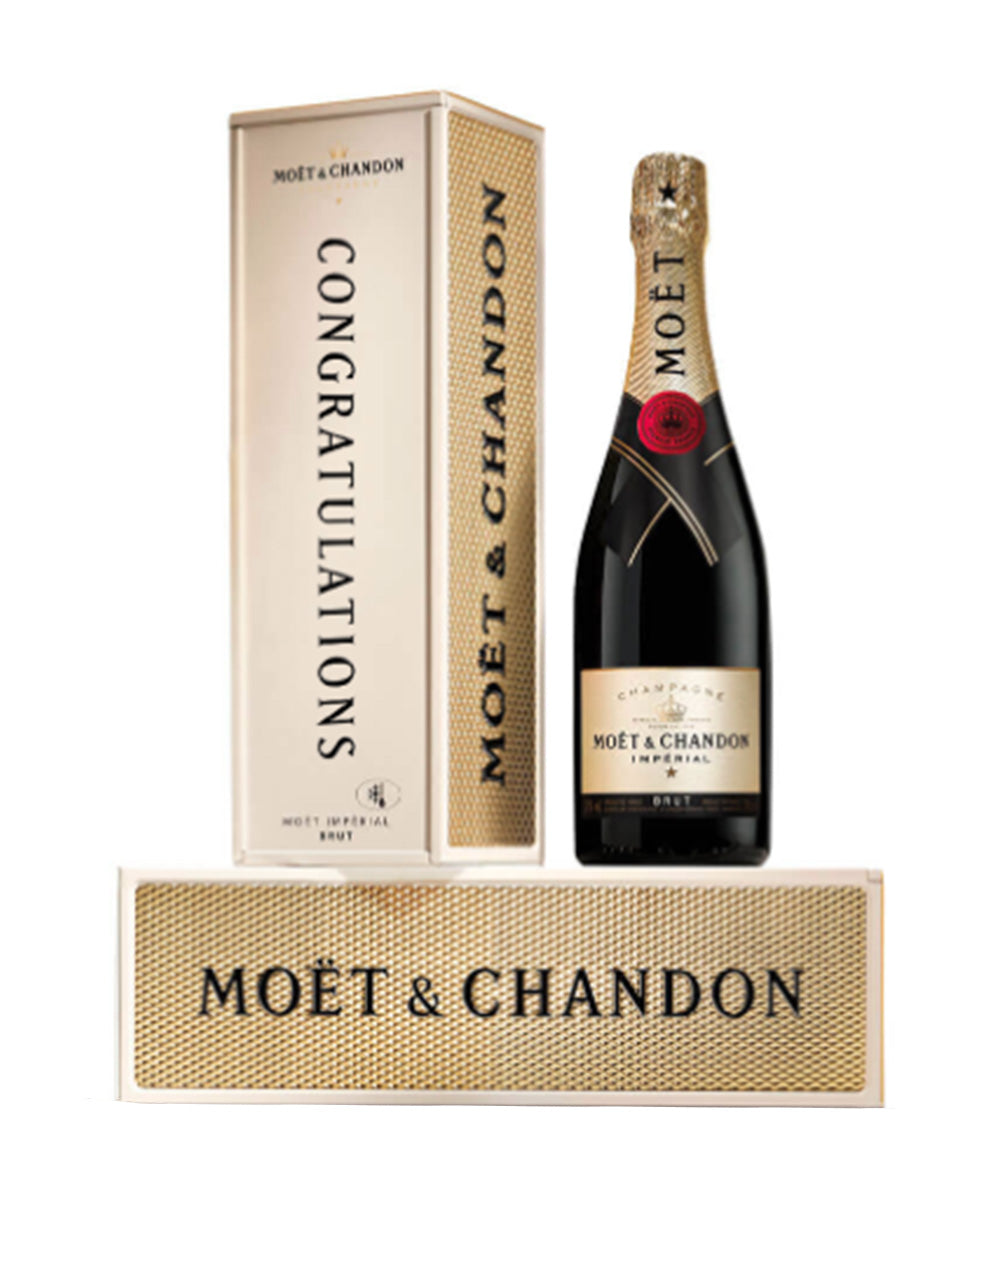 moet champagne price